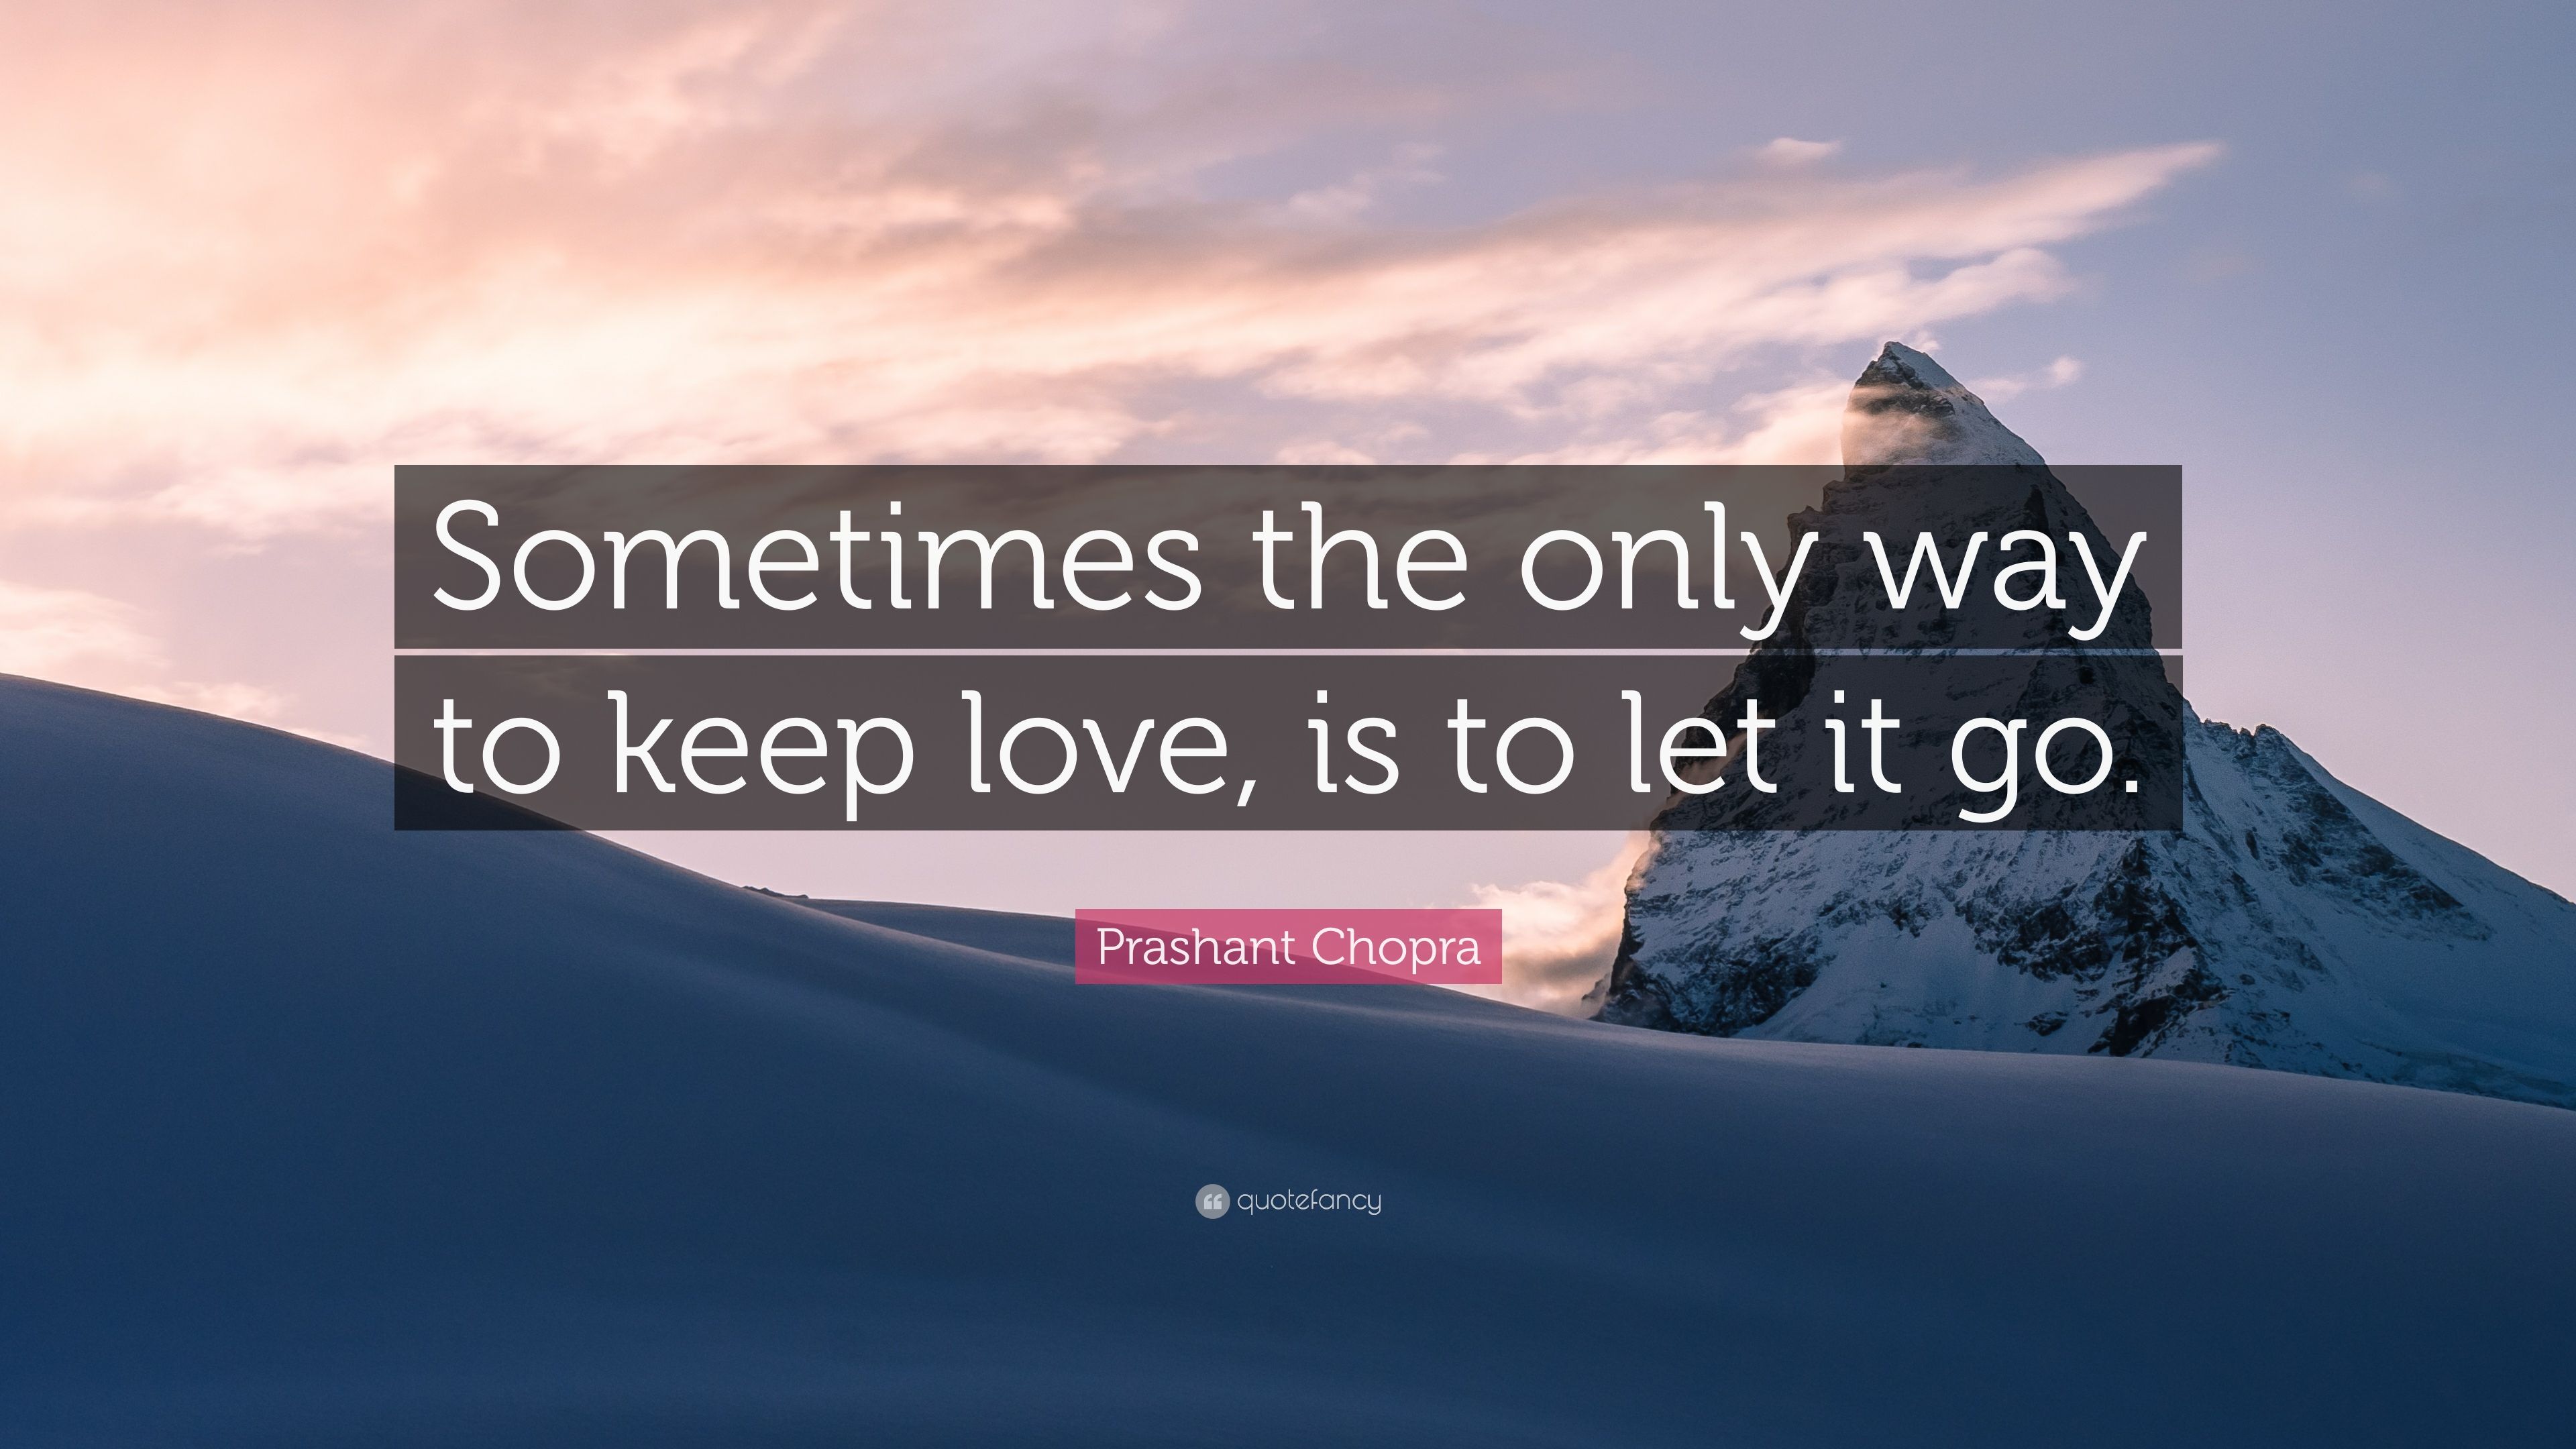 Prashant Chopra Quote: “Sometimes the only way to keep love, is to let it go.” (7 wallpaper)